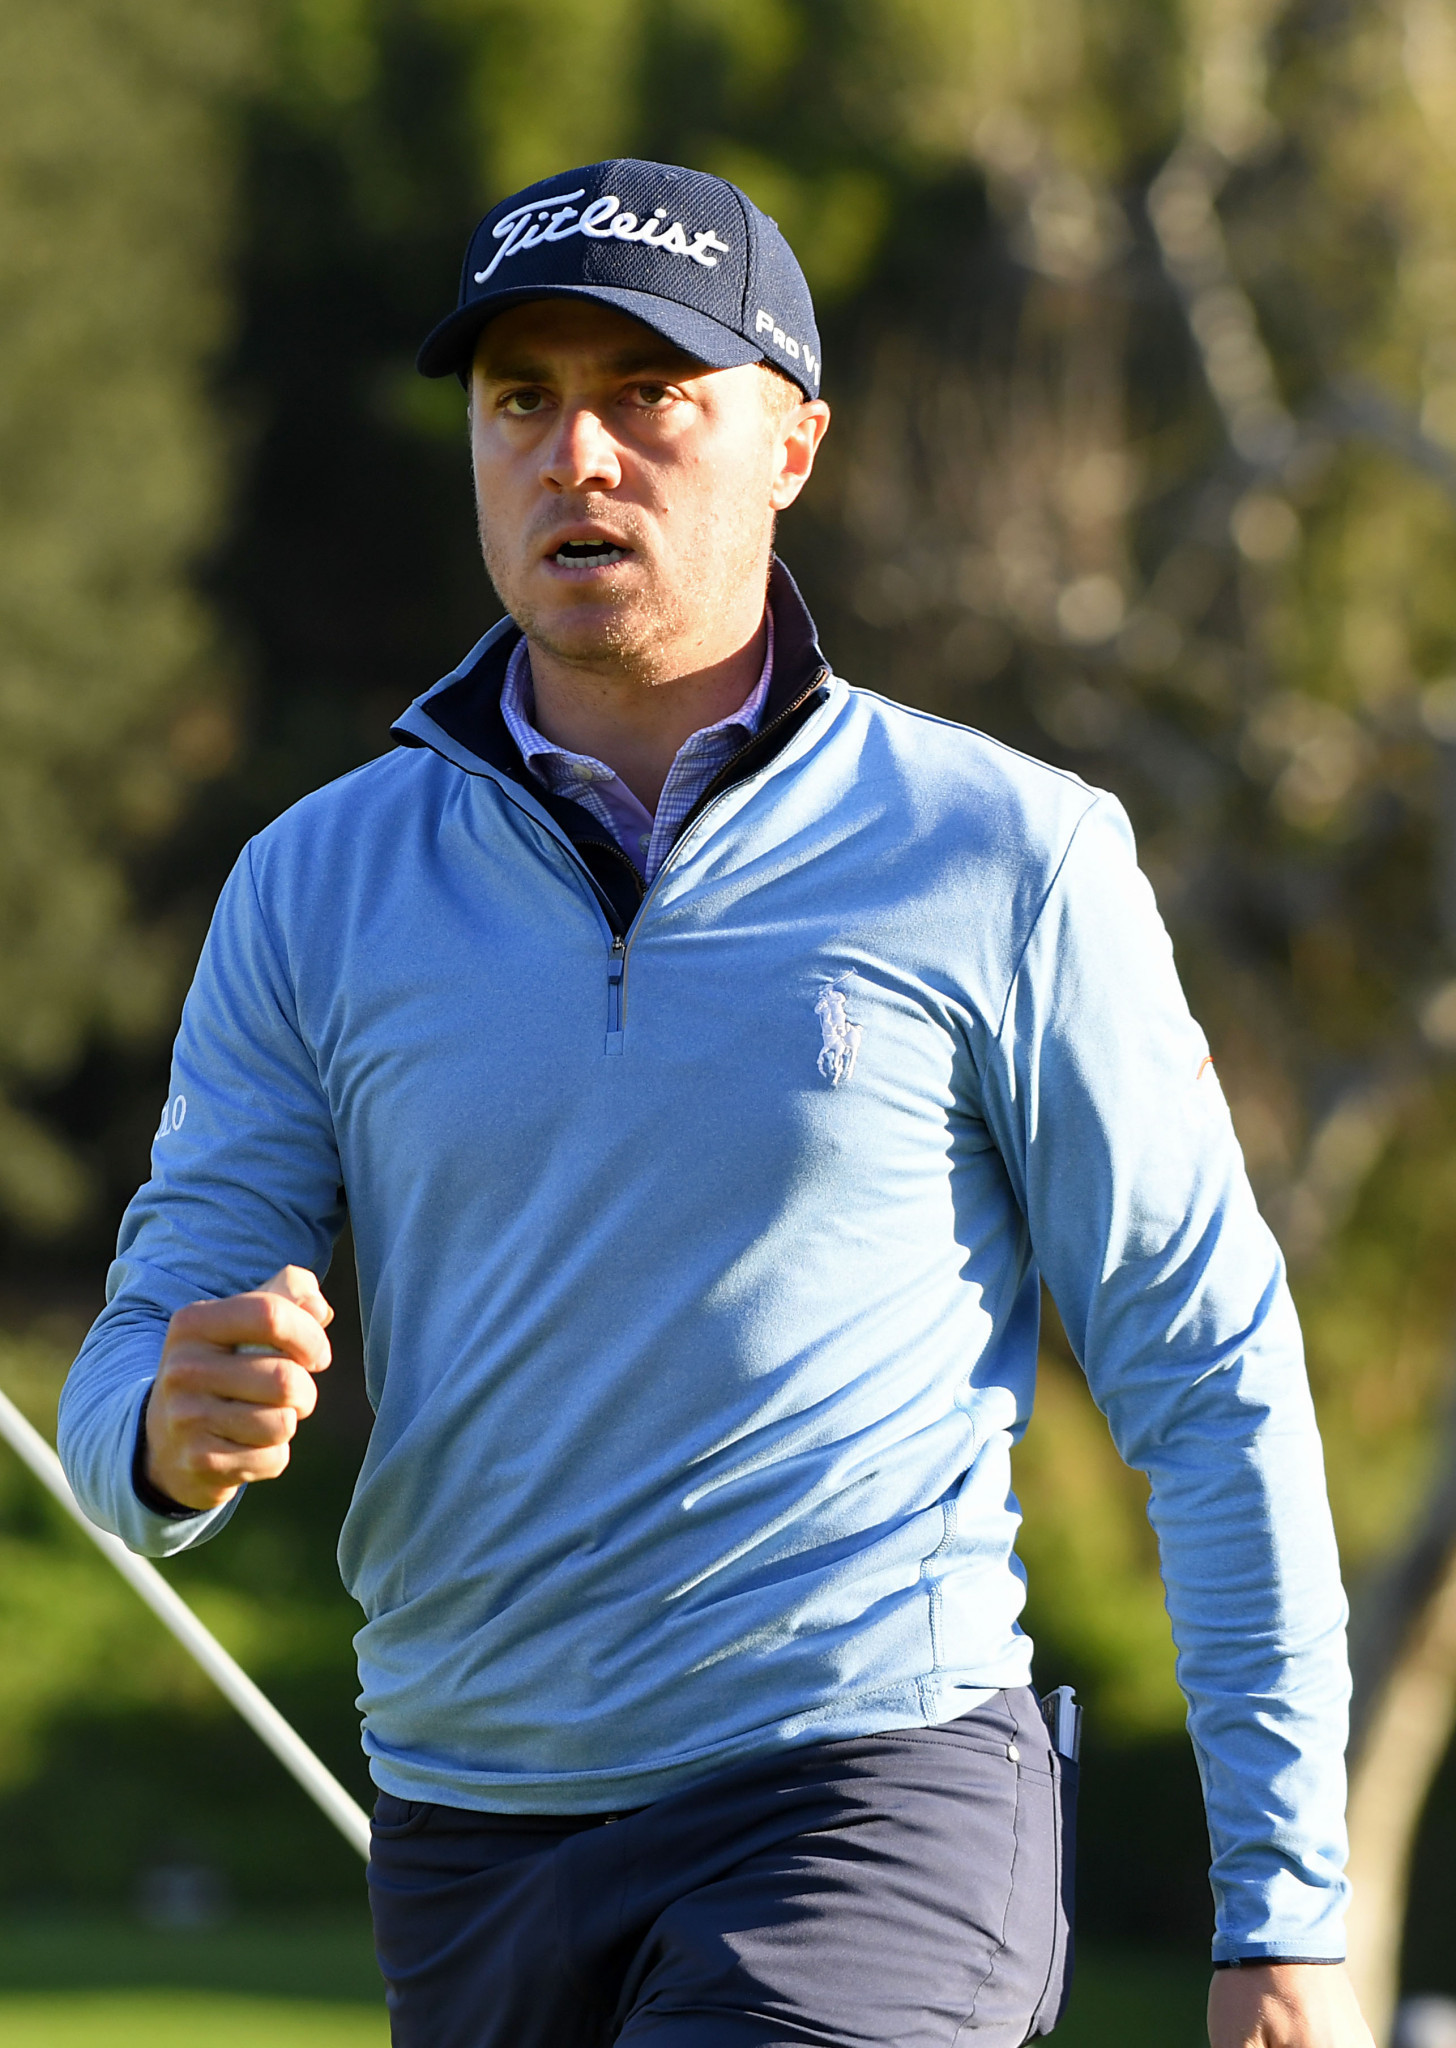 America's Justin Thomas finished second at last week's Genesis Open in California but is the favourite this time ©Getty Images